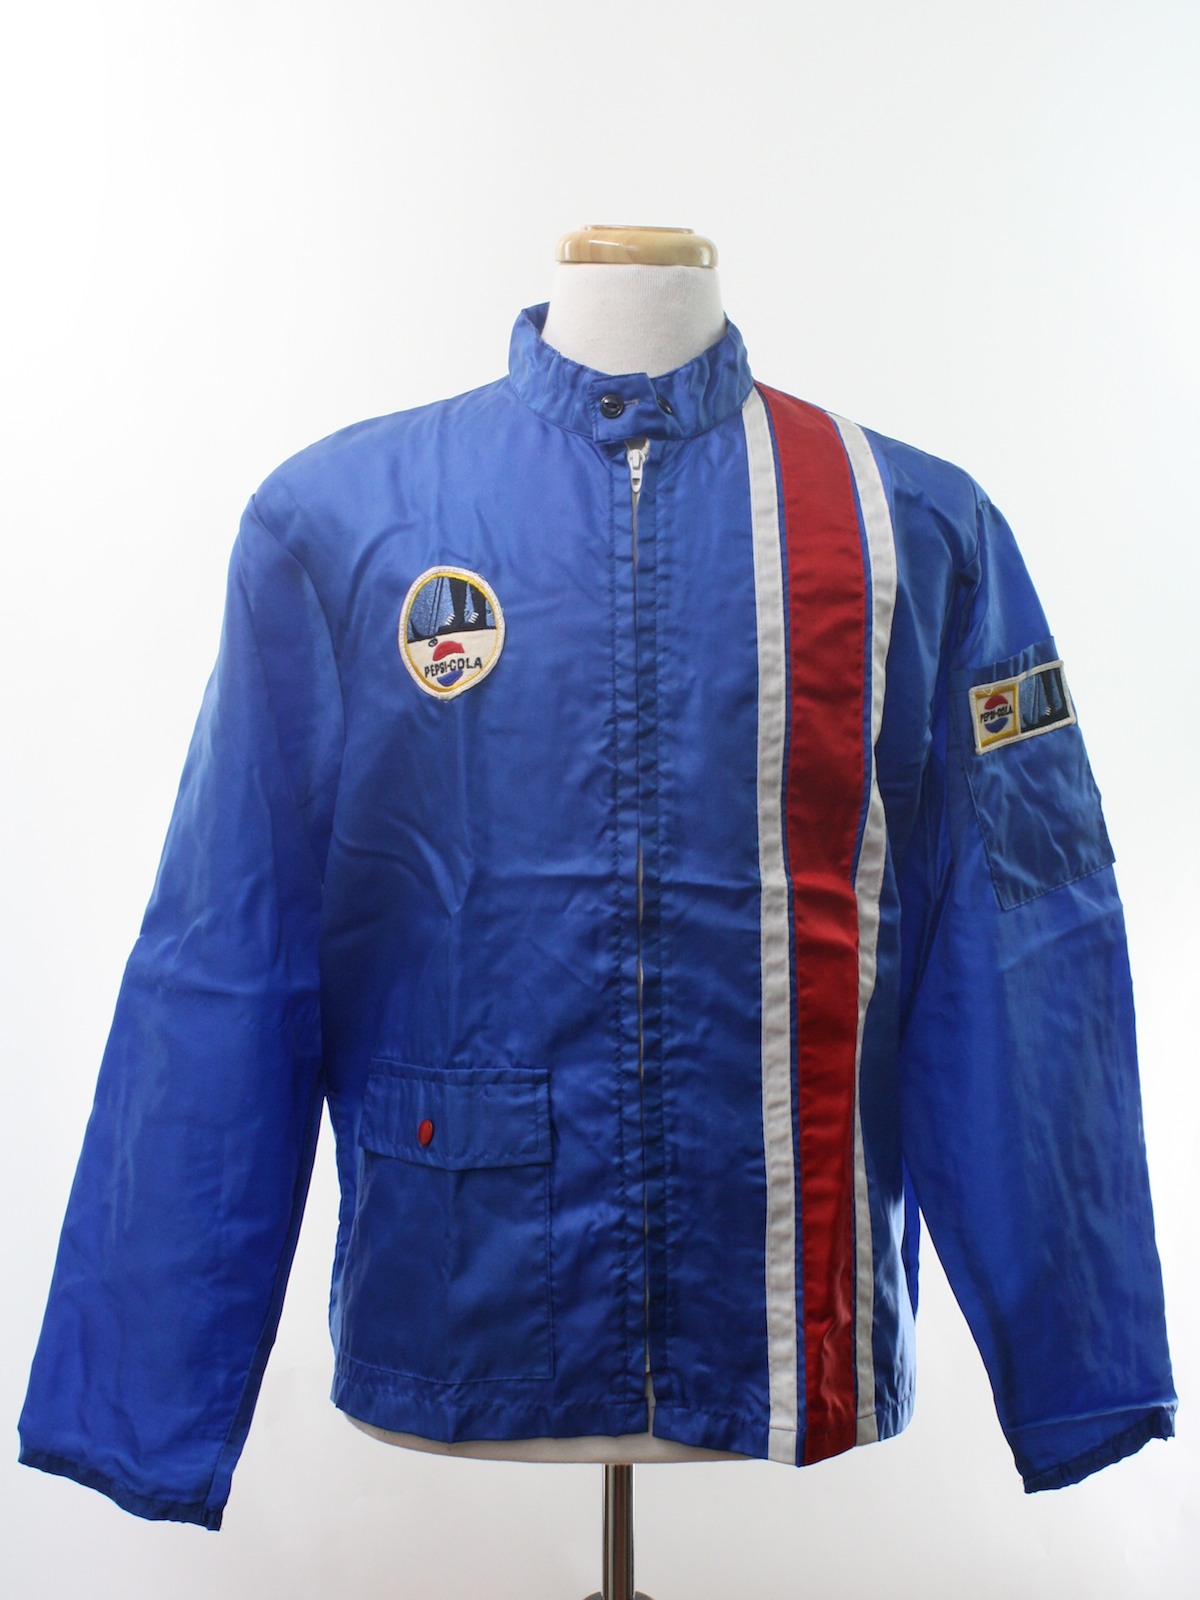 80s Retro Jacket: 80s -no label- Mens sapphire blue, white and red ...